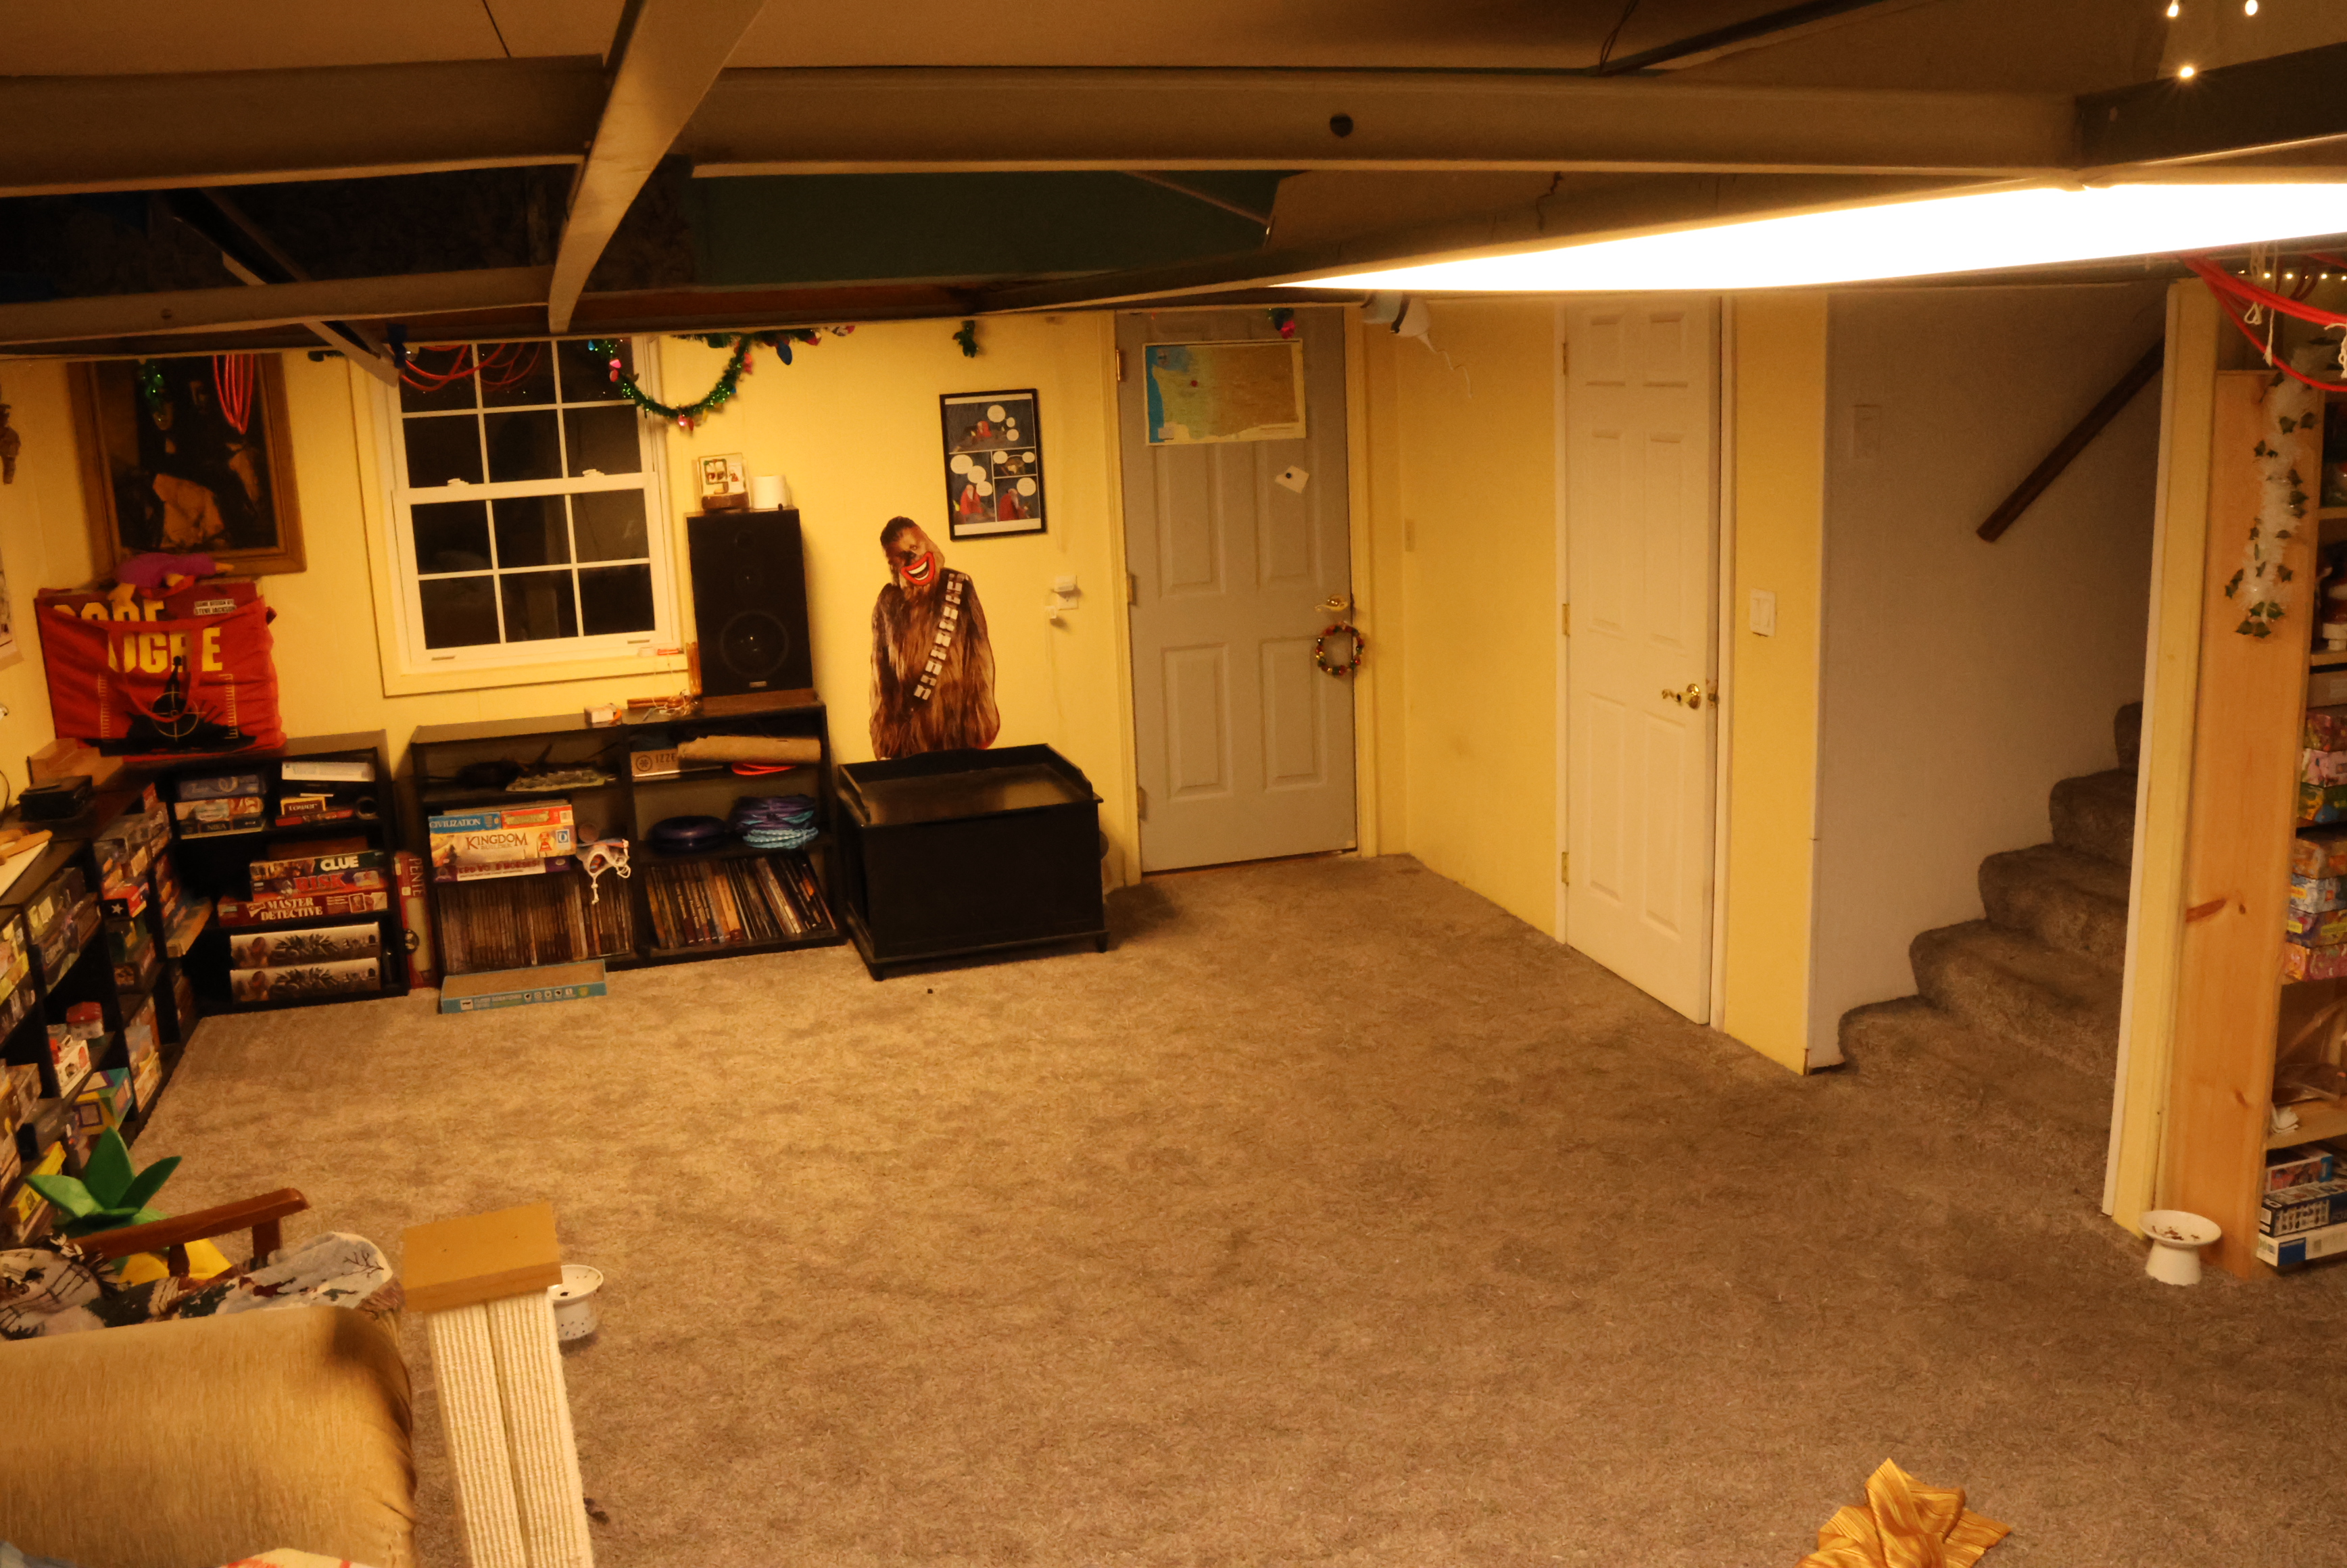 The basement in 2023. Much tidier! There's a new bookshelf I built over against the wall, and the ceiling tiles have all been removed. Since they've been gone Morrie has had way fewer asthma issues when she's down there. 